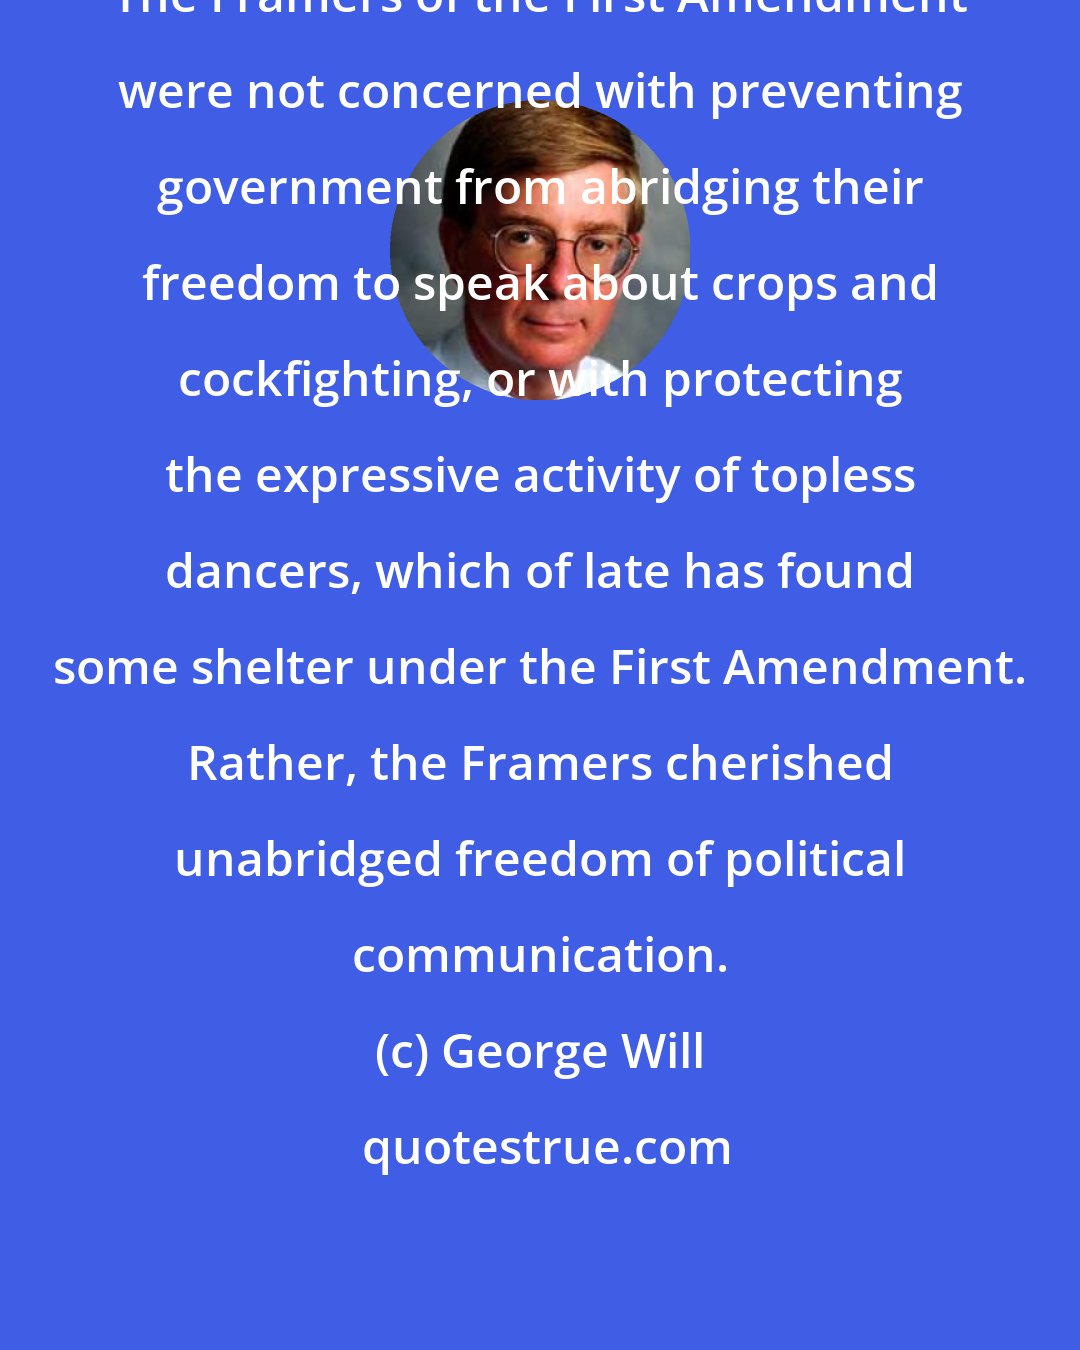 George Will: The Framers of the First Amendment were not concerned with preventing government from abridging their freedom to speak about crops and cockfighting, or with protecting the expressive activity of topless dancers, which of late has found some shelter under the First Amendment. Rather, the Framers cherished unabridged freedom of political communication.